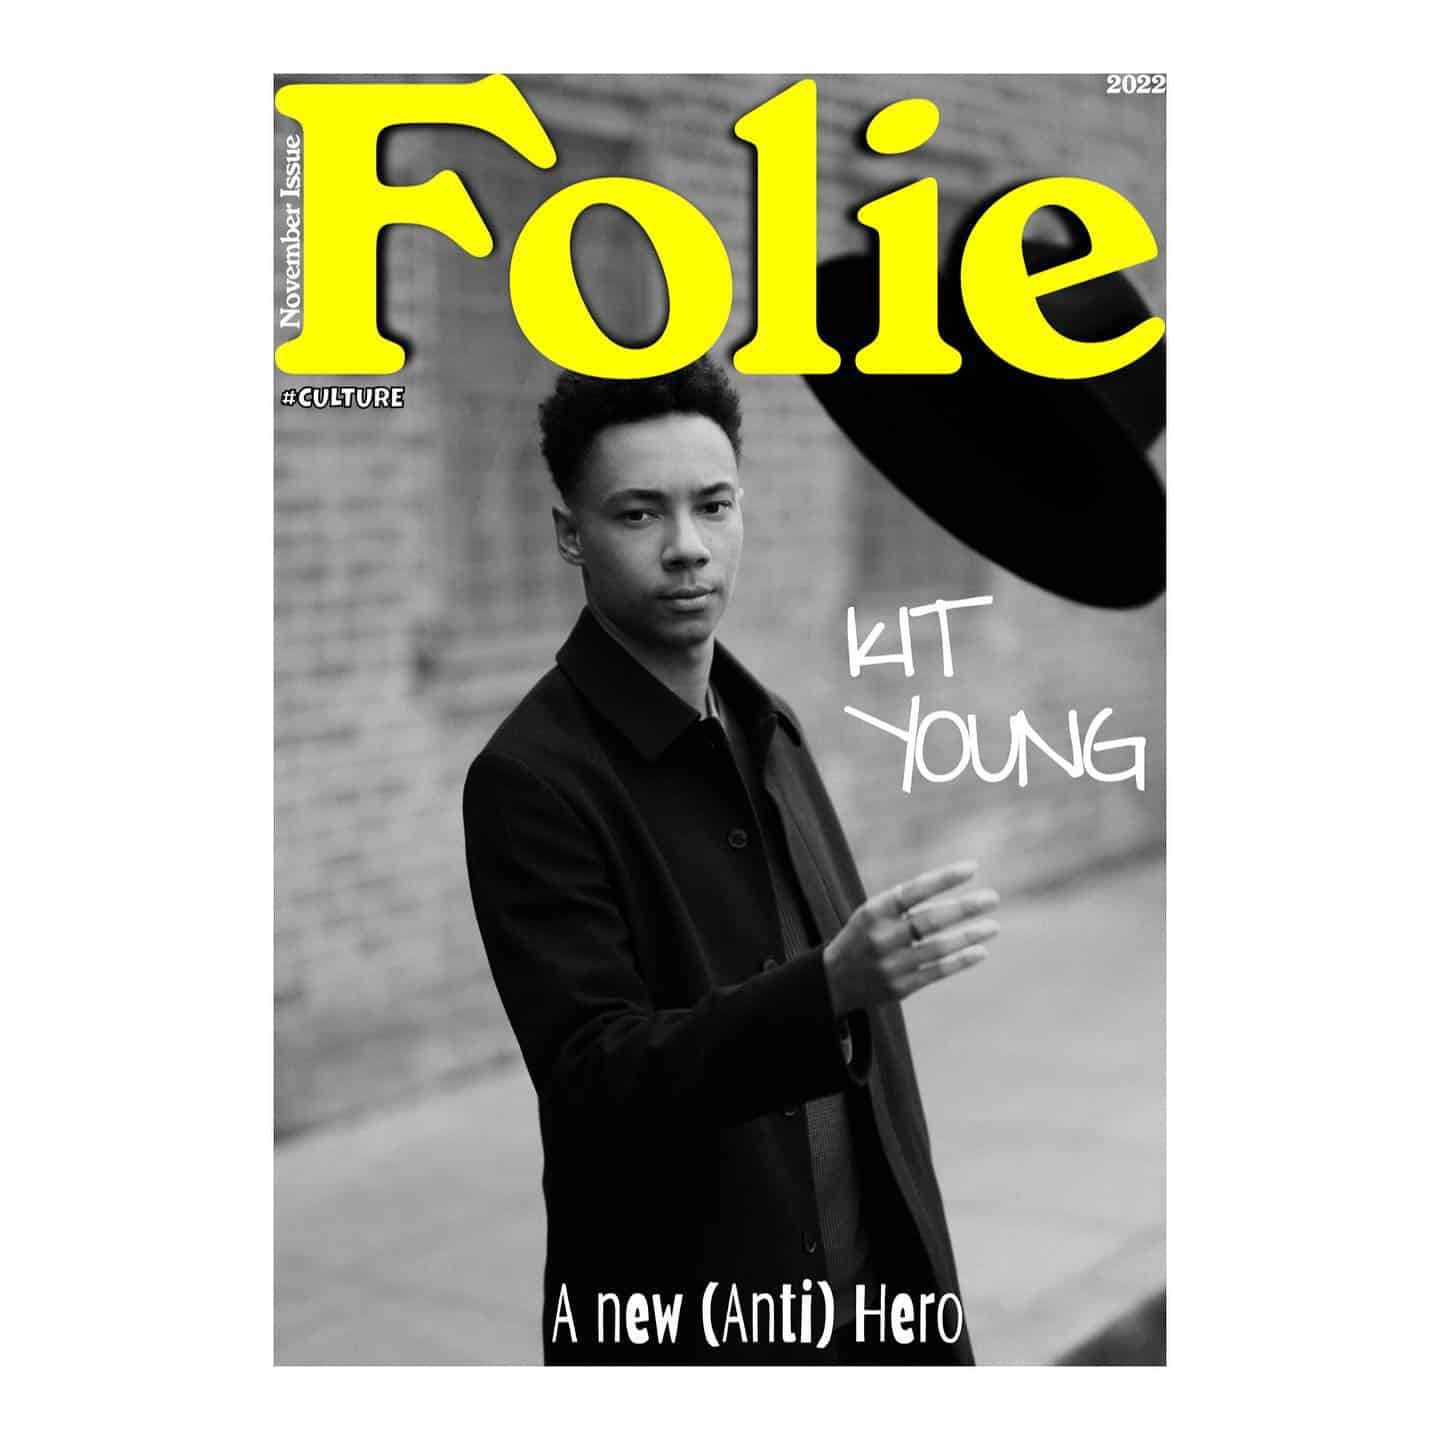 @kittheyounger as the digital cover of @folie.magazine discussing @theschoolforgoodandevilmovie with @pabloaragon 
.
.
.
📸 @bypip 
 @olgatimofejeva 
‍♂️ @nadiaaltinbas 
🖊 @pabloaragon 
.
.
.